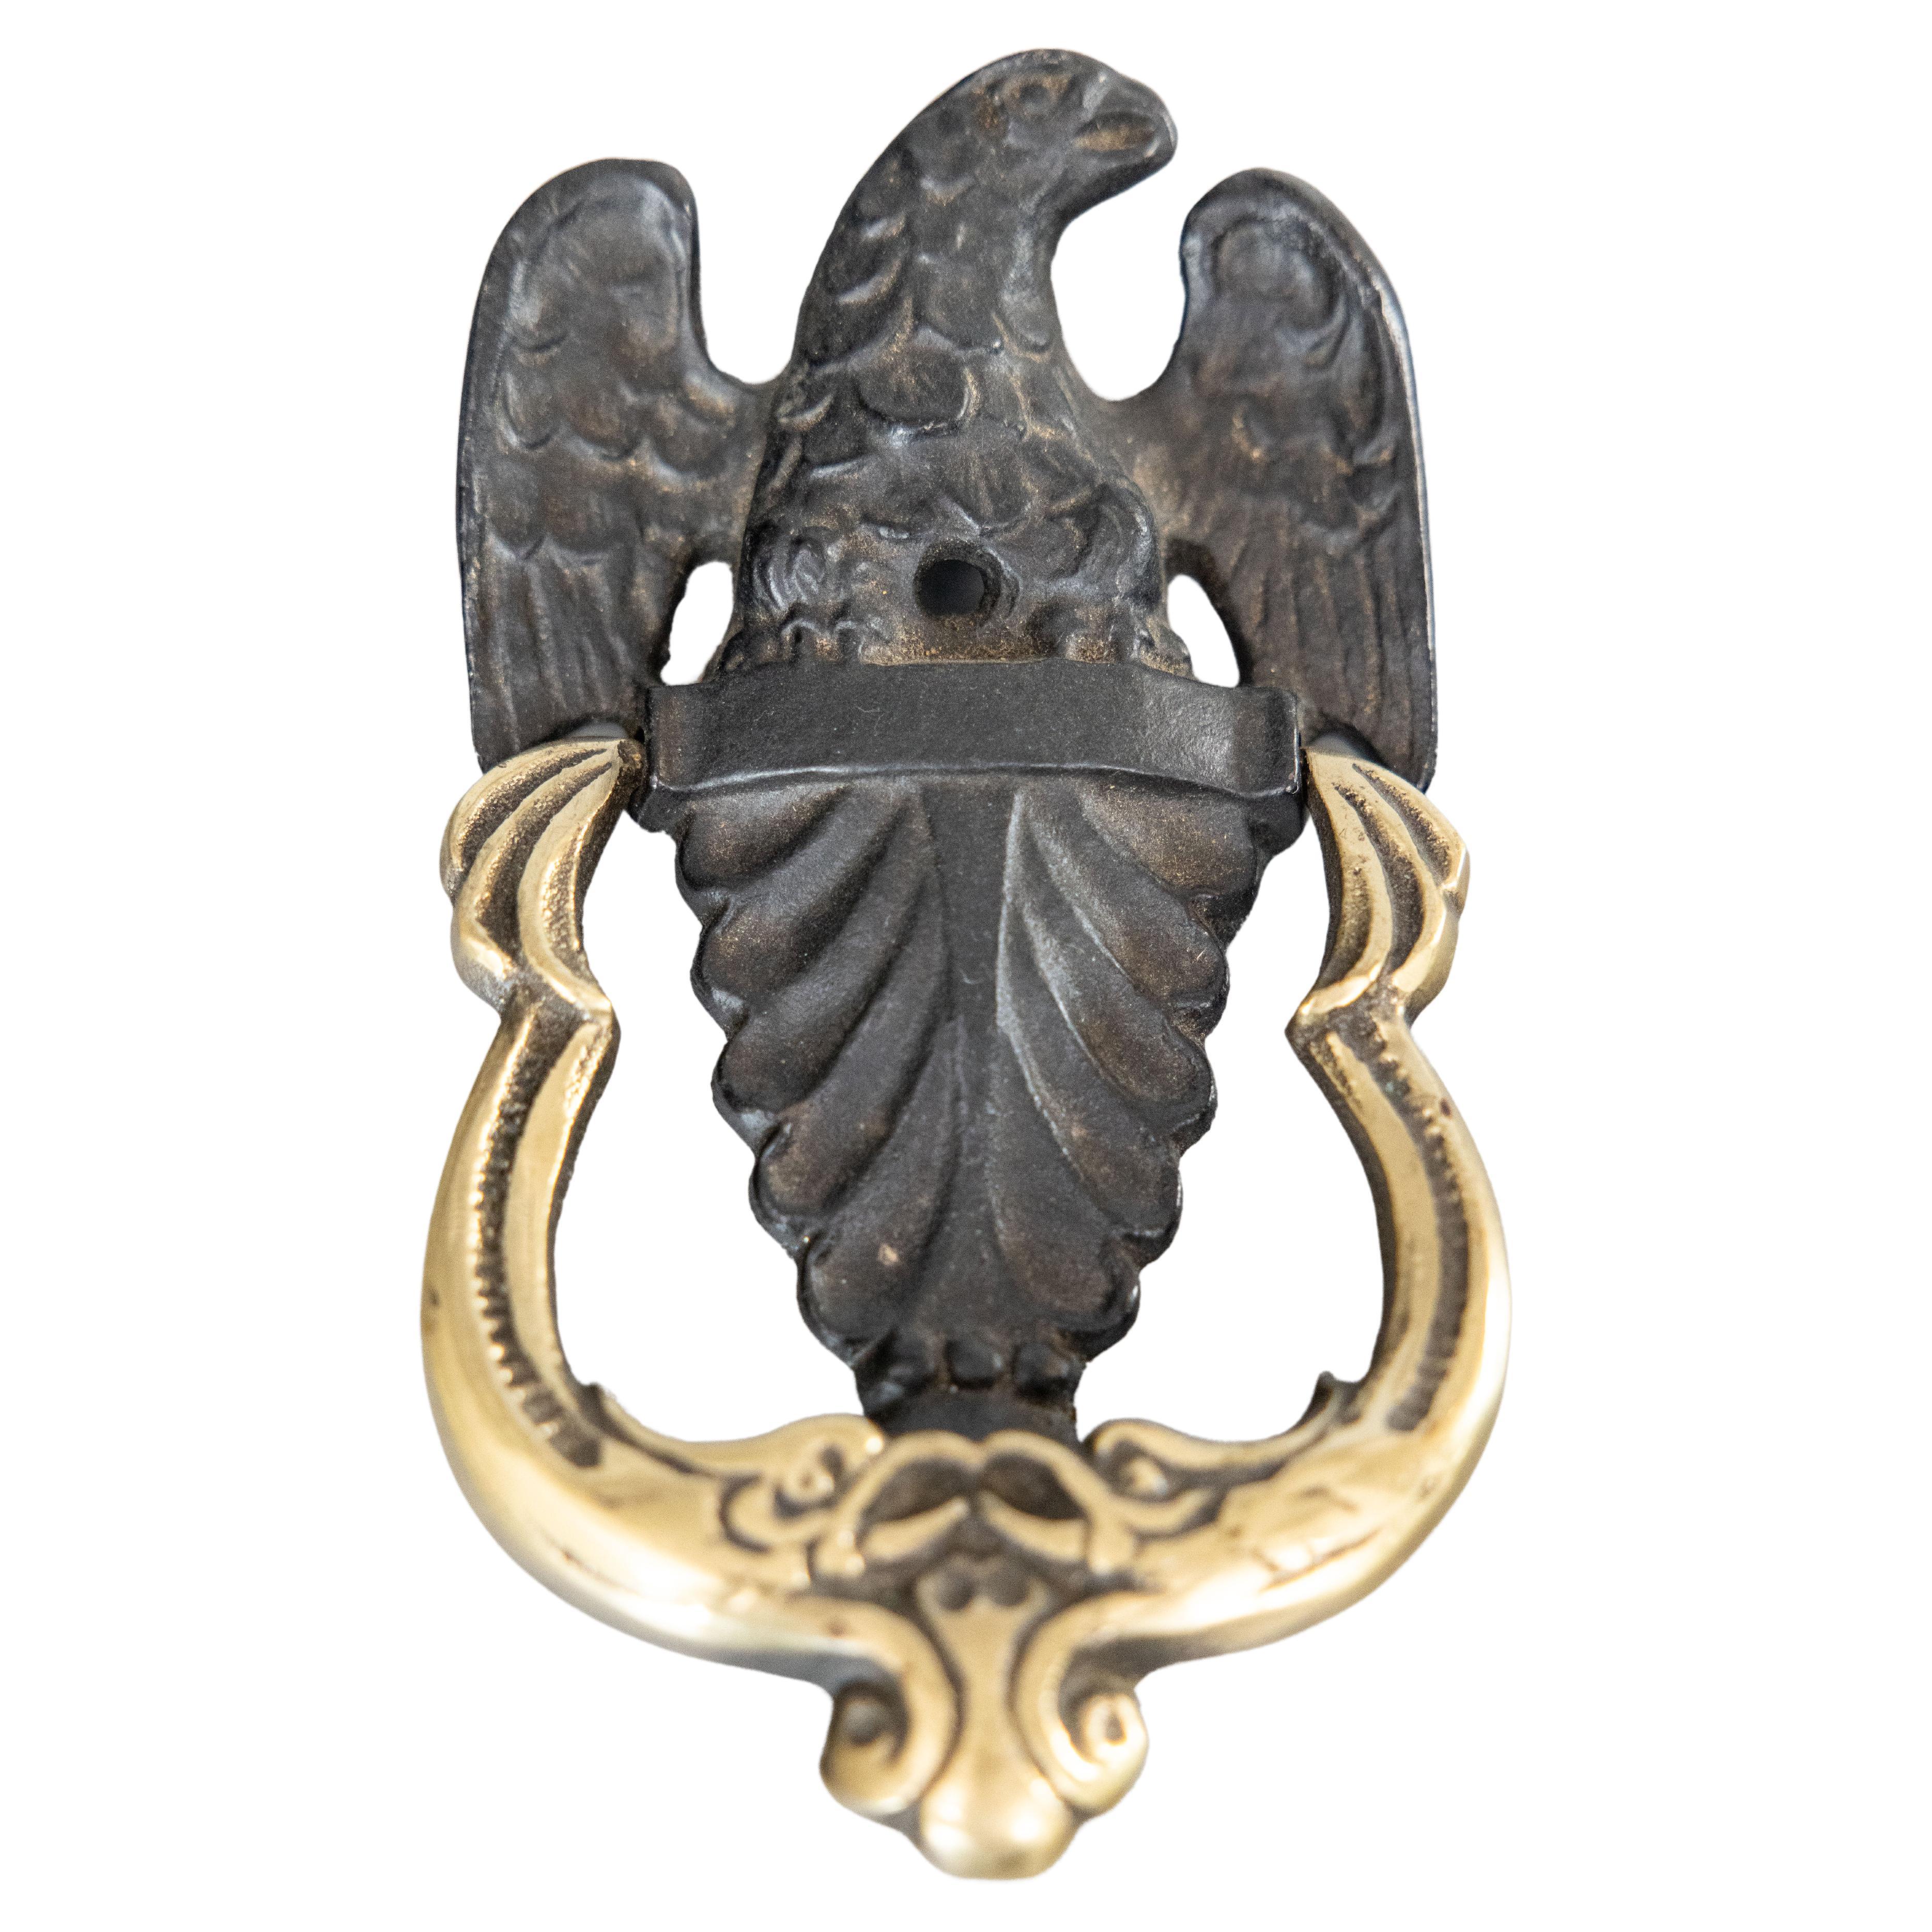 Early 20th Century American Cast Iron & Brass Federal Eagle Door Knocker For Sale